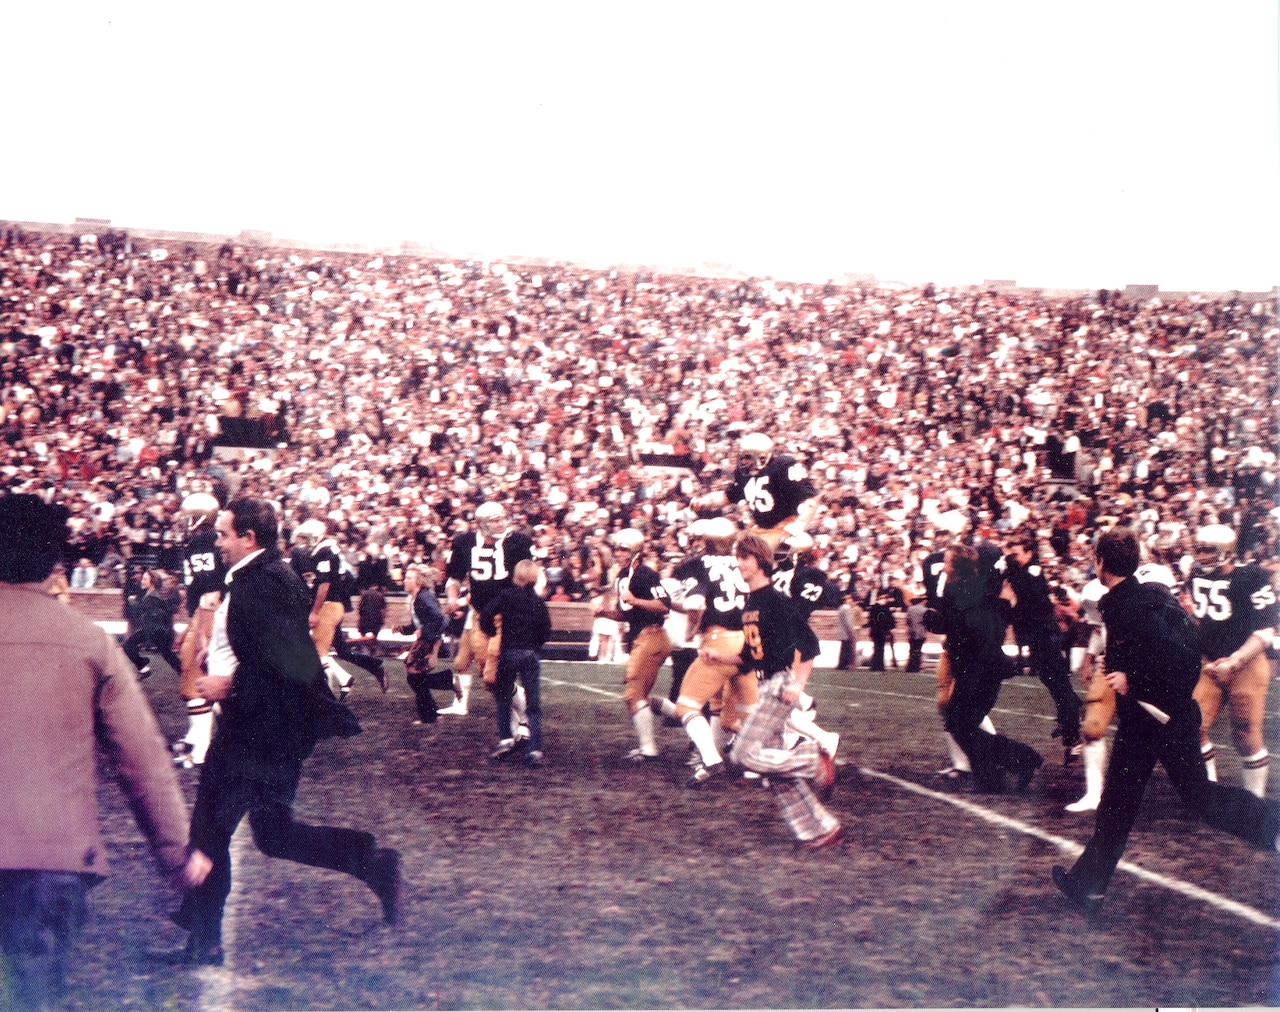 People are running off a football field as a football player is carried by teammates on their shoulders. In the background, the stands are filled with people.